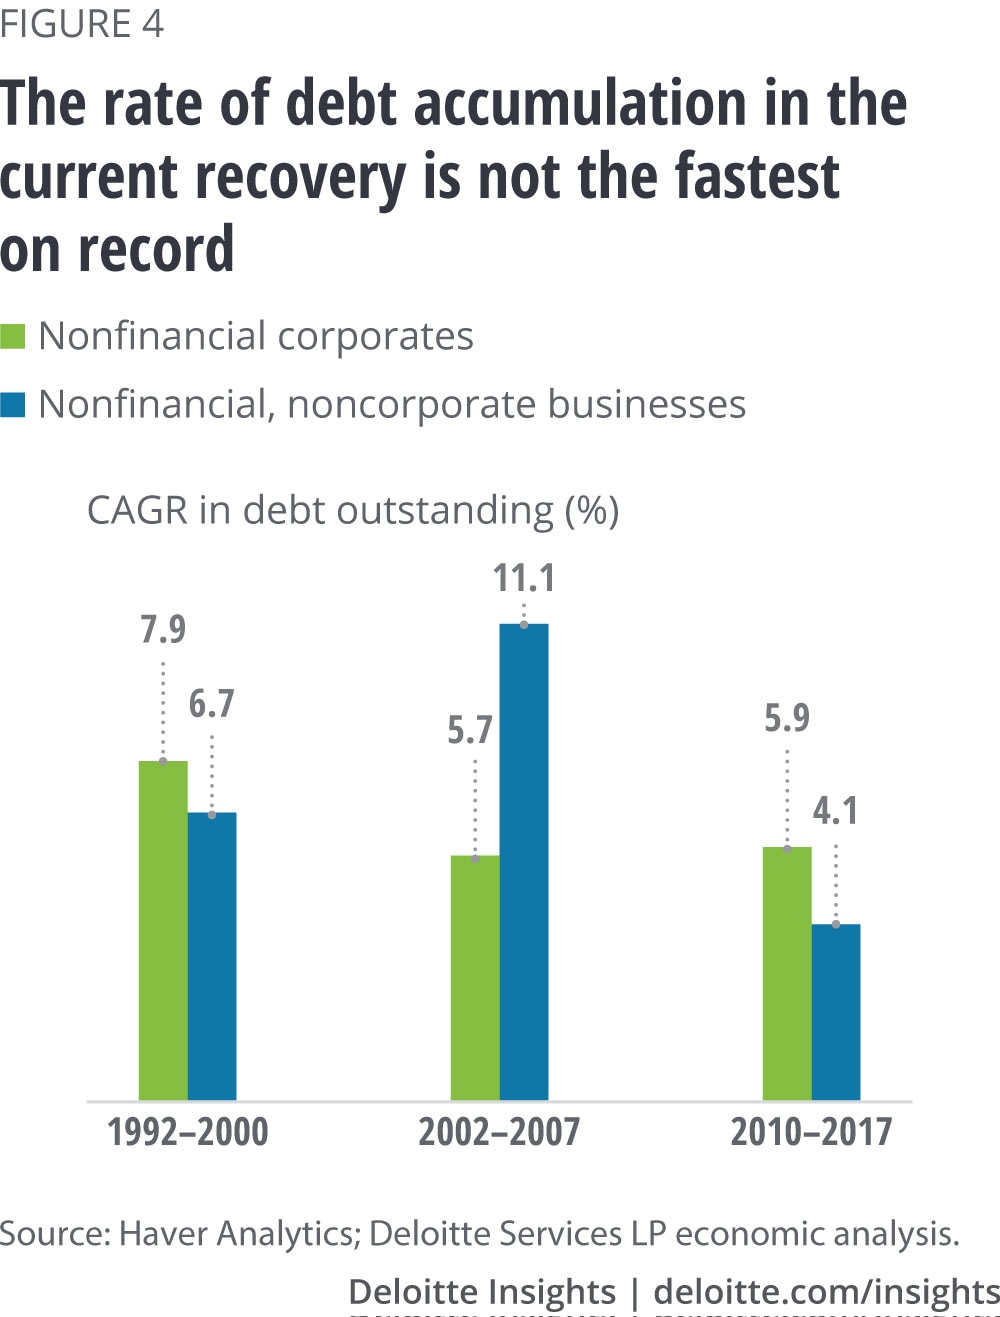 The rate of debt accumulation in the current recovery is not the fastest on record